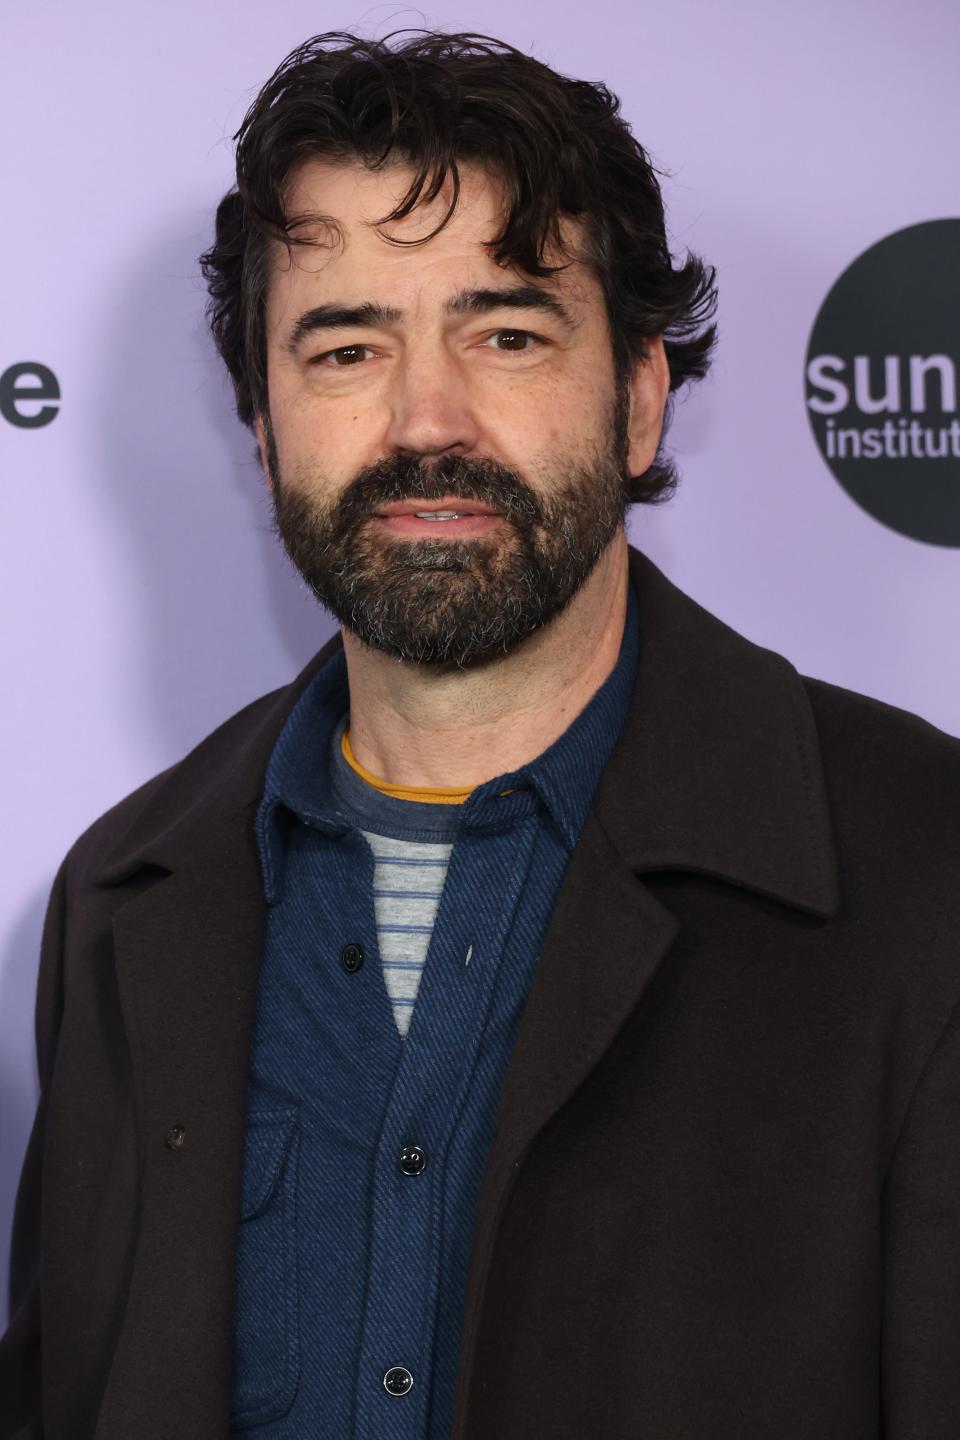 PARK CITY, UTAH - JANUARY 18: Ron Livingston attends "Out Of My Mind" Premiere during the 2024 Sundance Film Festival at Egyptian Theatre on January 18, 2024 in Park City, Utah. (Photo by Matt Winkelmeyer/Getty Images) ORG XMIT: 776080134 ORIG FILE ID: 1945301348